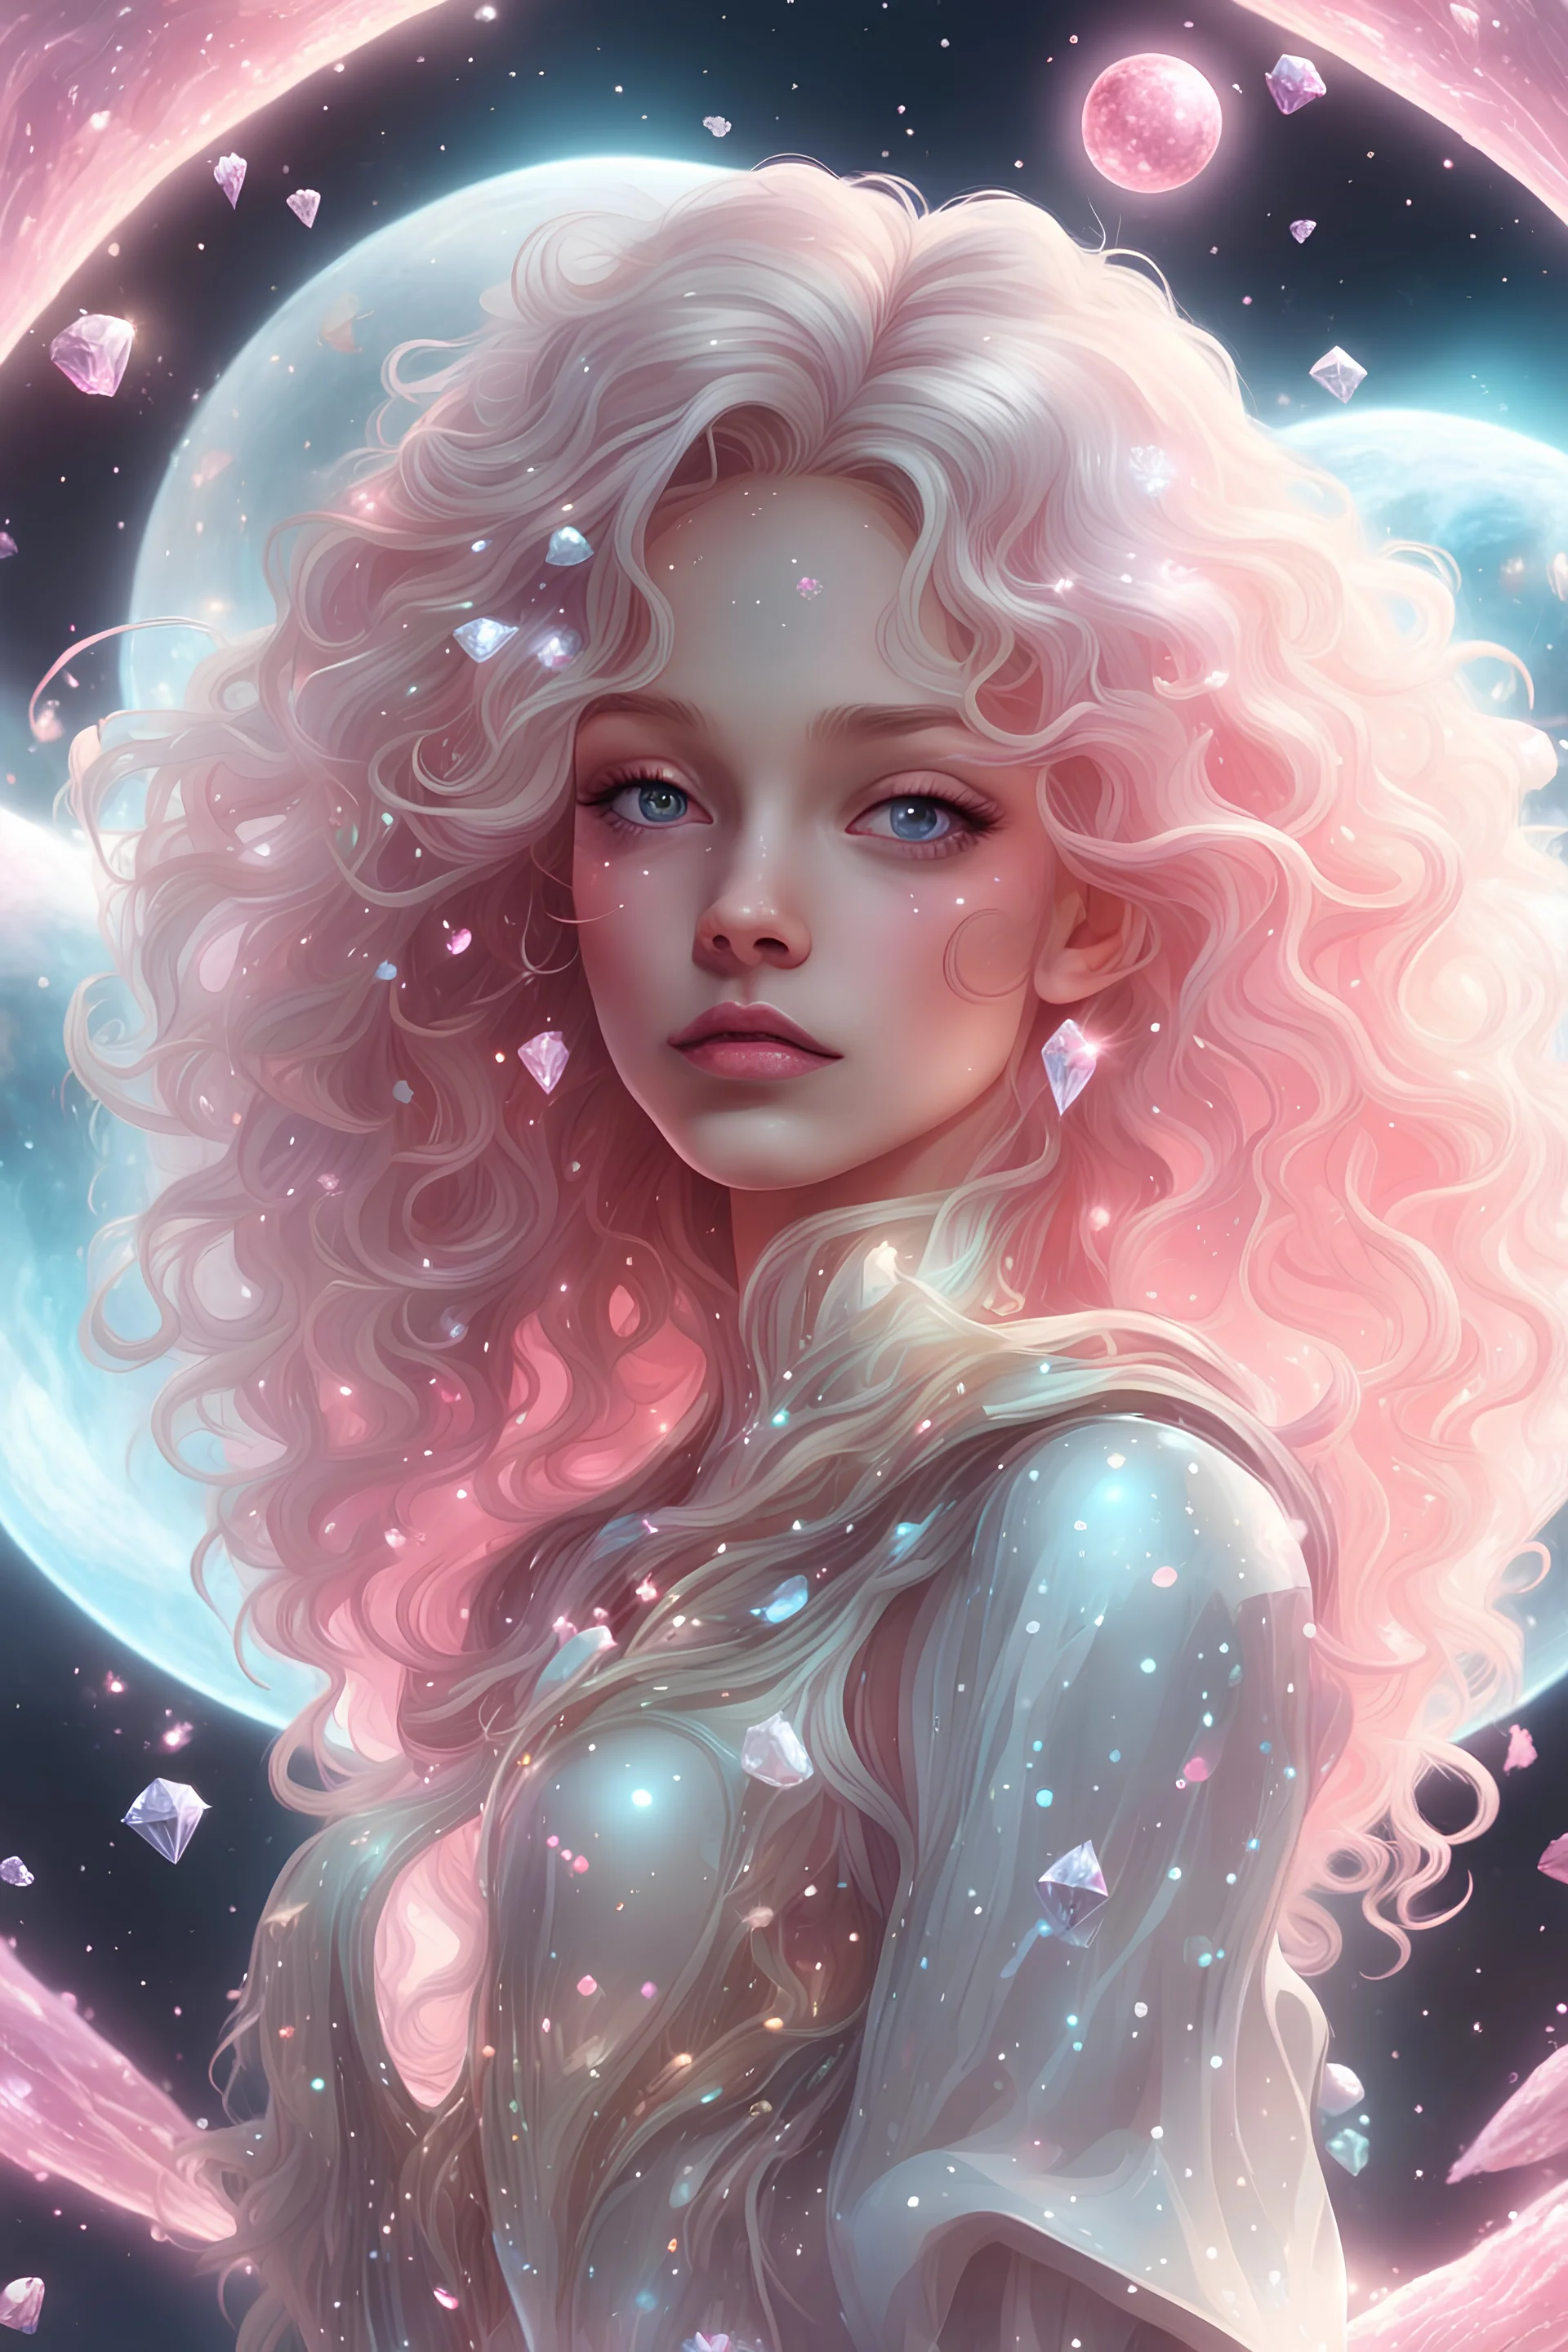 glittering diamond planet. glitter rain and silver comets. pink cosmic magic. pink stardust. faedyx. seven moons and guarding spirits. pixel hearts. neon portals. reflections and dimensions. ethereal pastel colors.planet made of diamonds. white angelic curly hair. porcelain Angel face. space outfit.